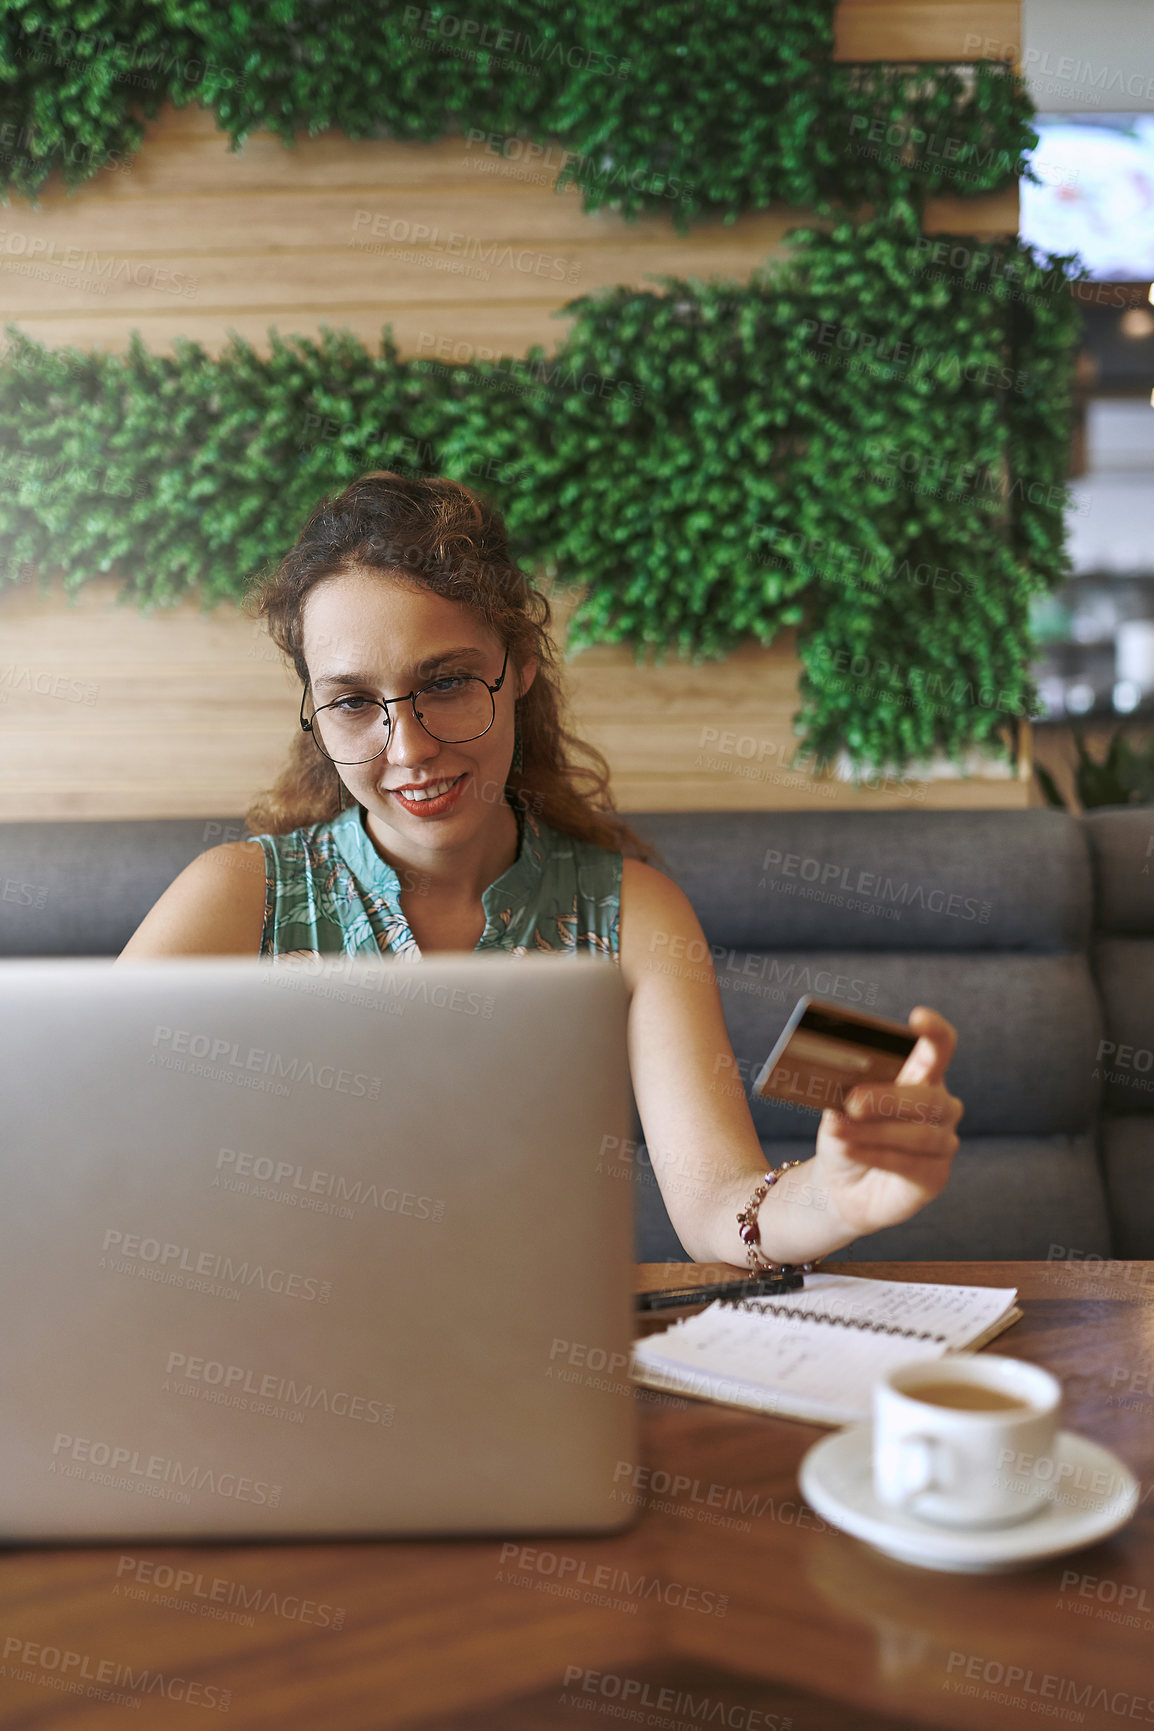 Buy stock photo Shot of a young woman using a laptop and credit card while working at a cafe